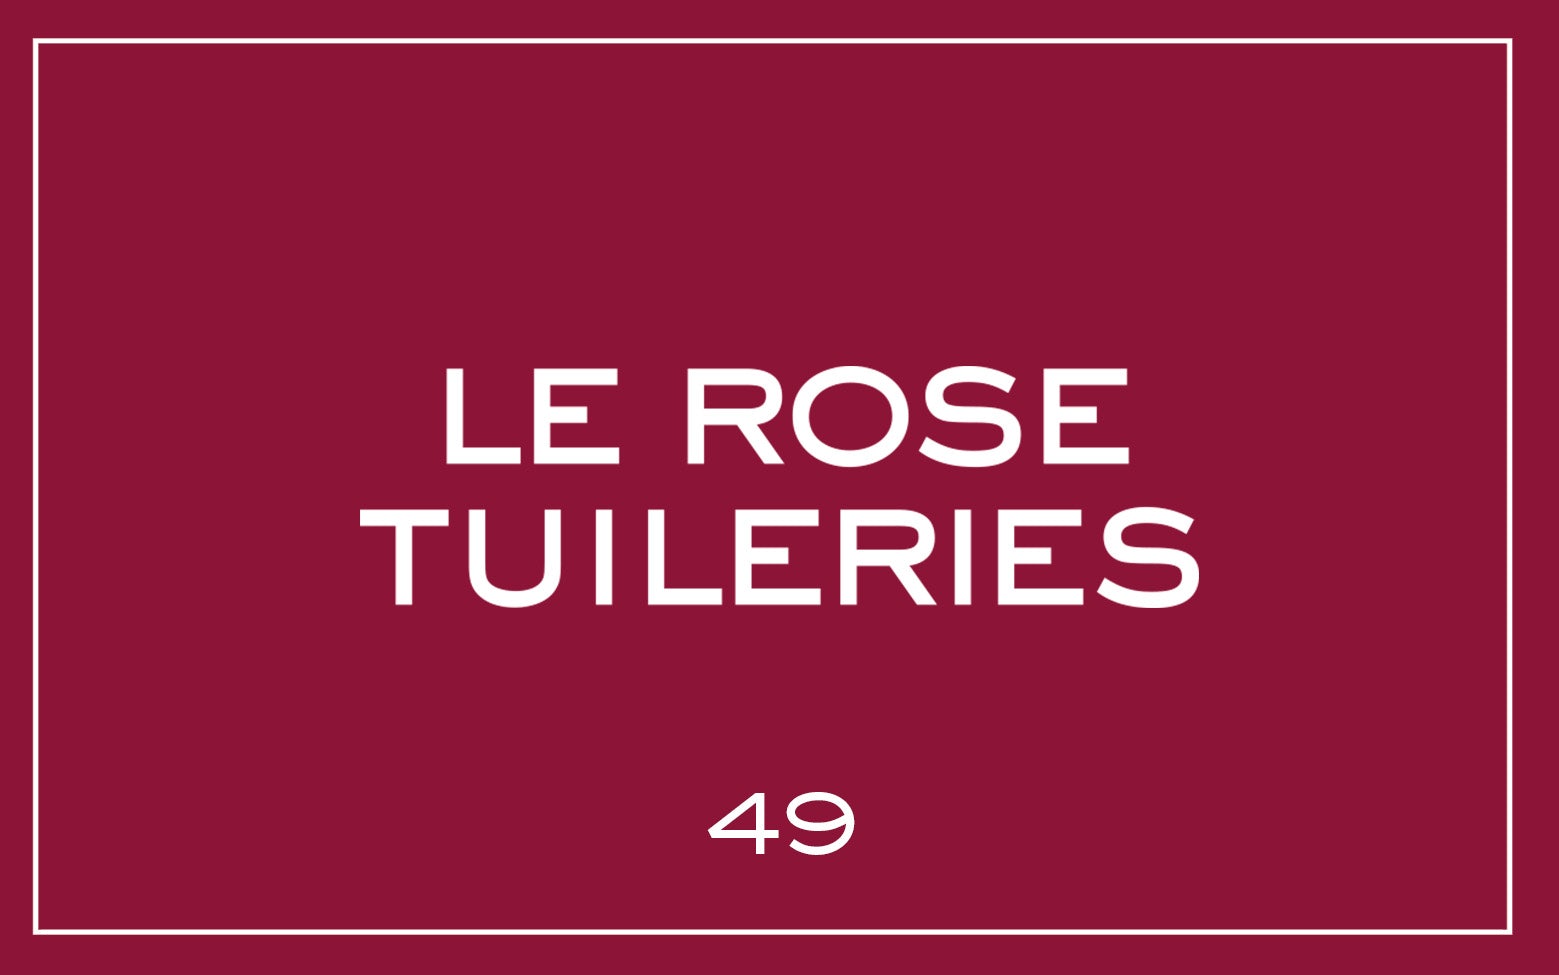 La bouche rouge Le Rose Tuileries lipstick swatch with text